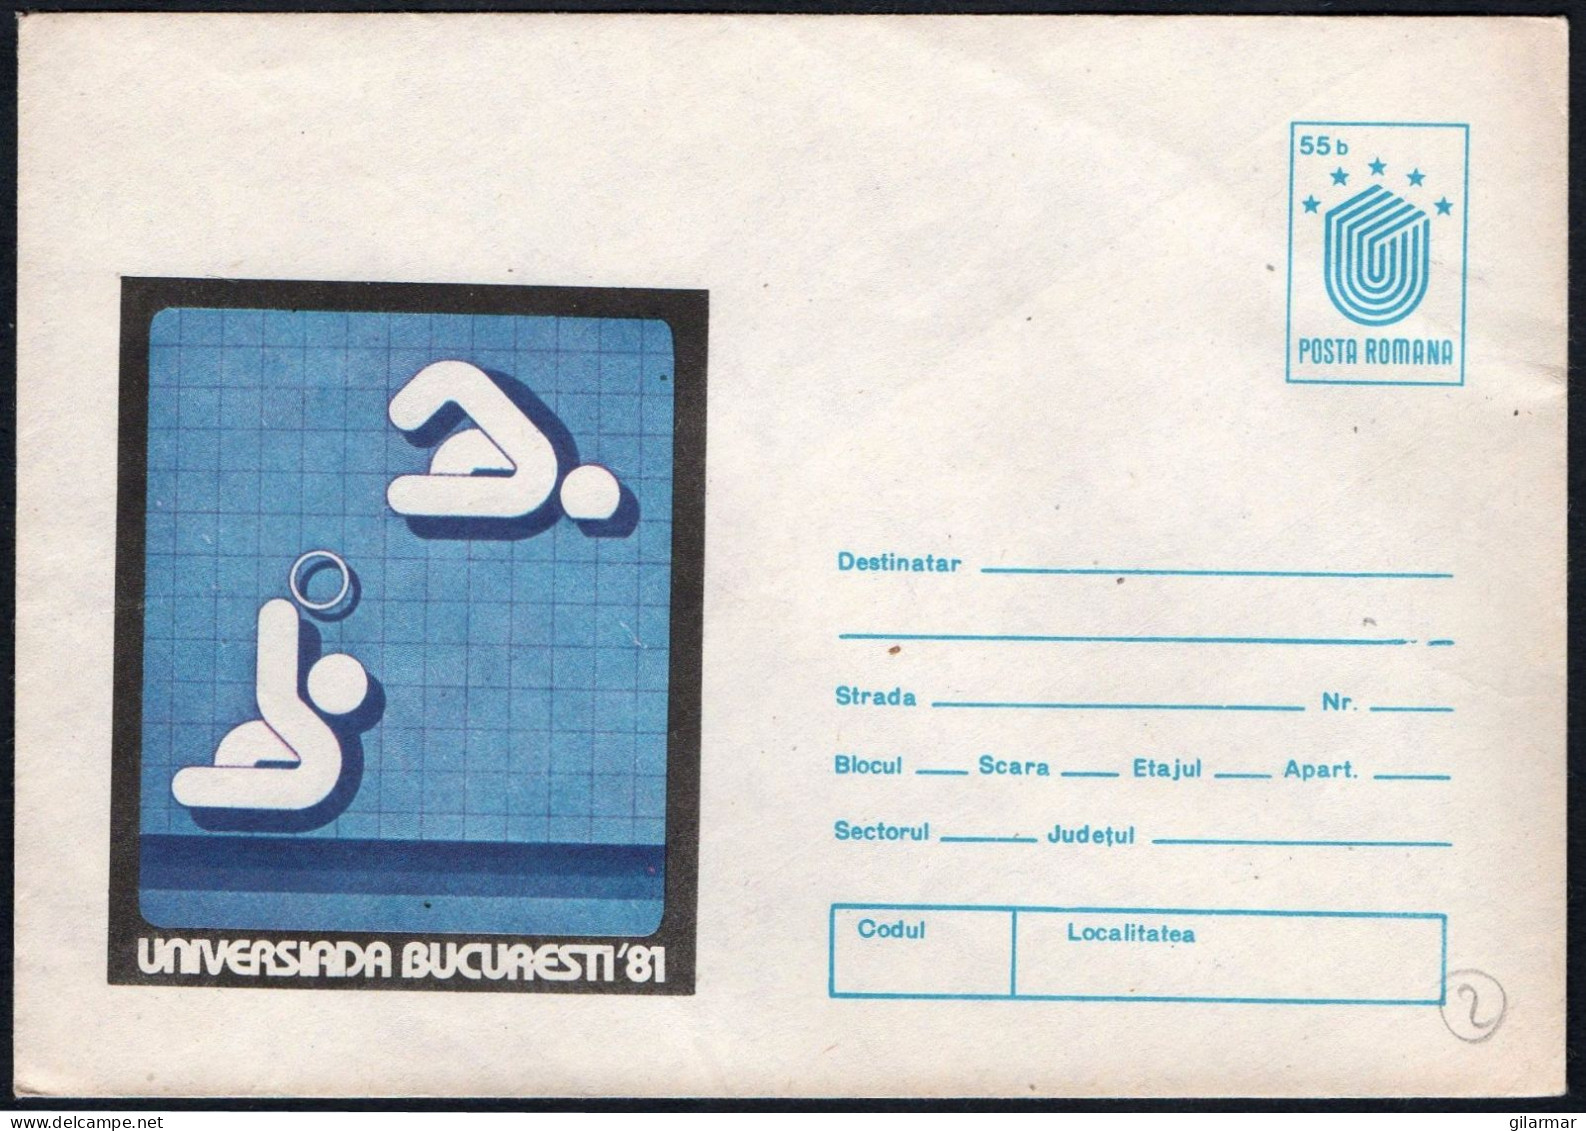 ROMANIA 1981 - UNIVERSITY GAMES 1981 - STATIONARY: WATERPOLO - MINT - G - Water Polo